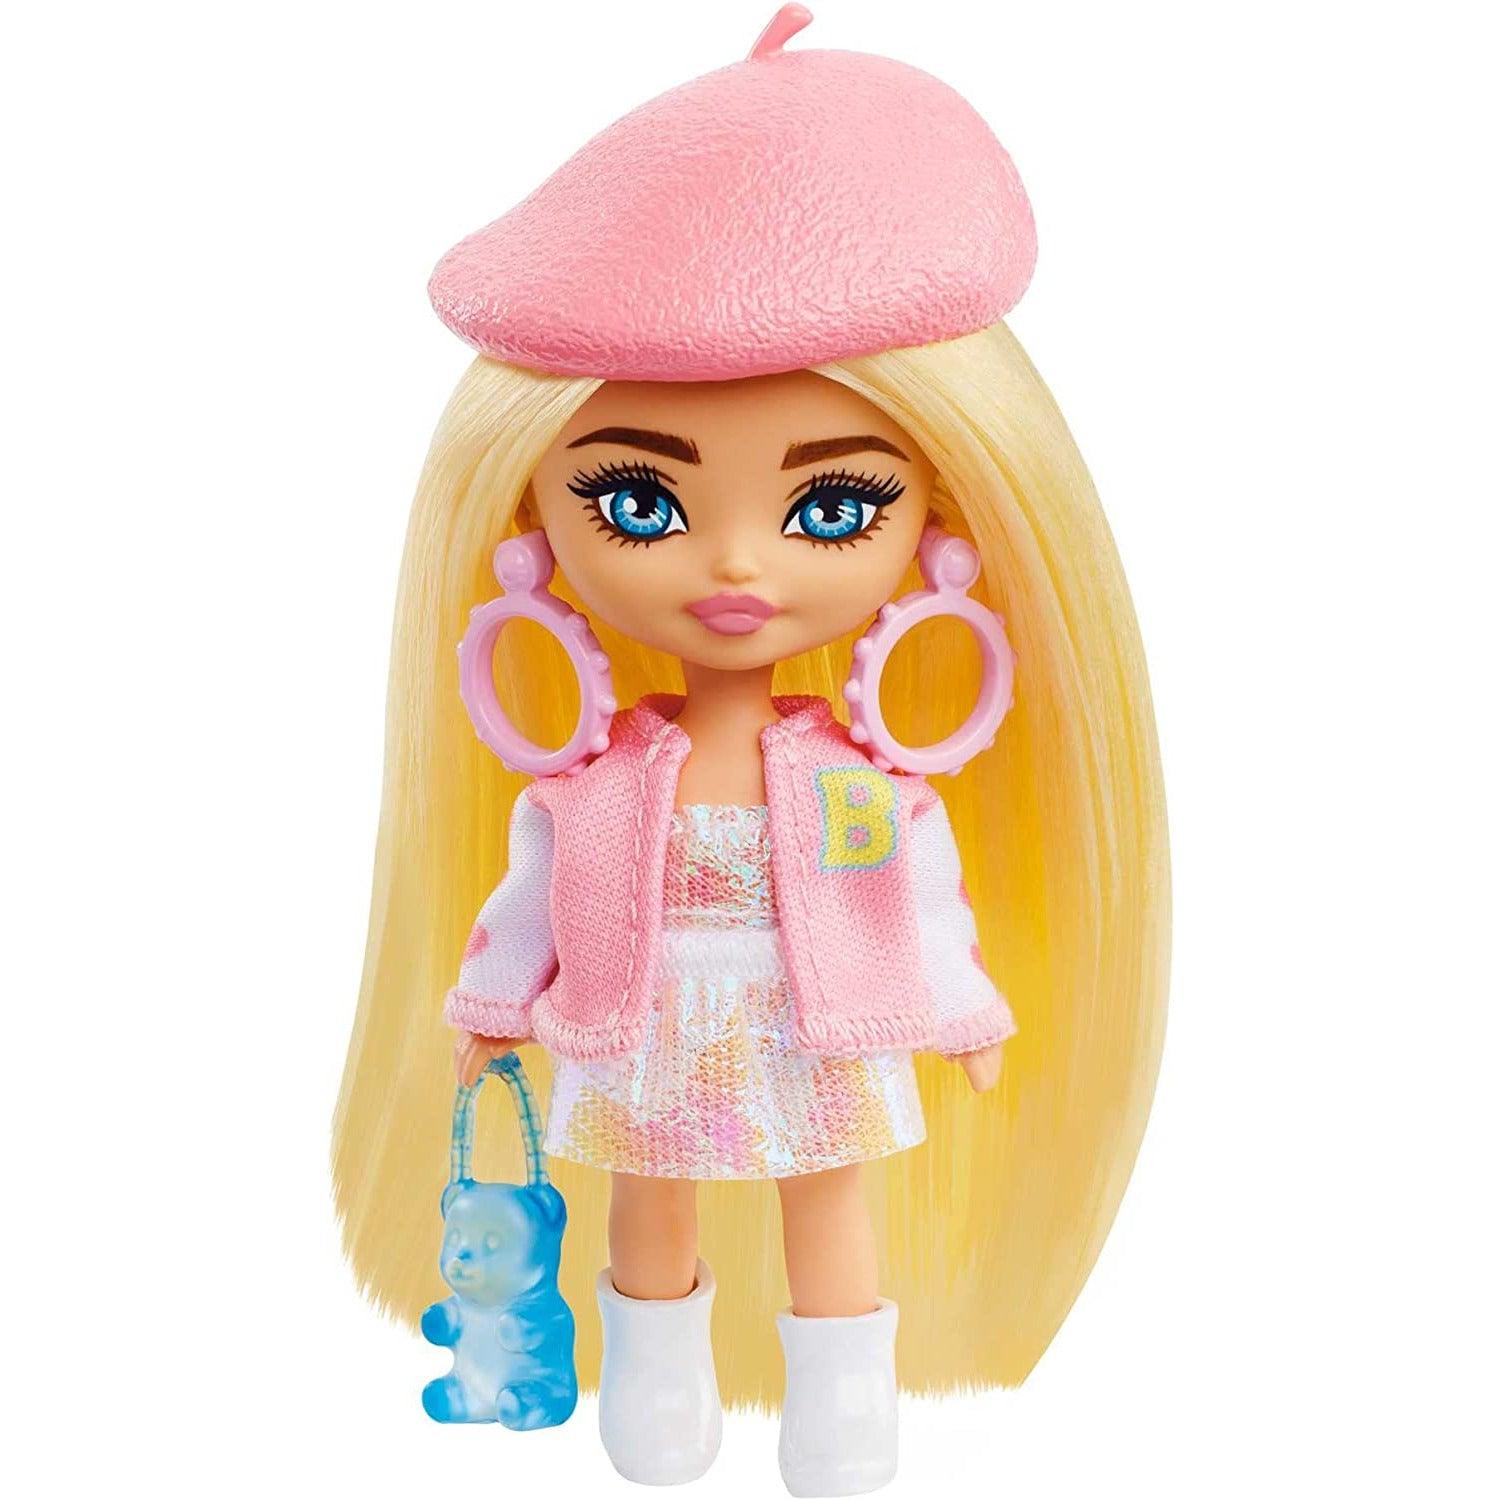 Barbie Extra Mini Minis Doll with Blonde Hair, Beret, Varsity Jacket & Accessories & Stand, 3.25-Inch - BumbleToys - 5-7 Years, Barbie, Barbie Extra, Dolls, Fashion Dolls & Accessories, Girls, Miniature Dolls & Accessories, OXE, Pre-Order